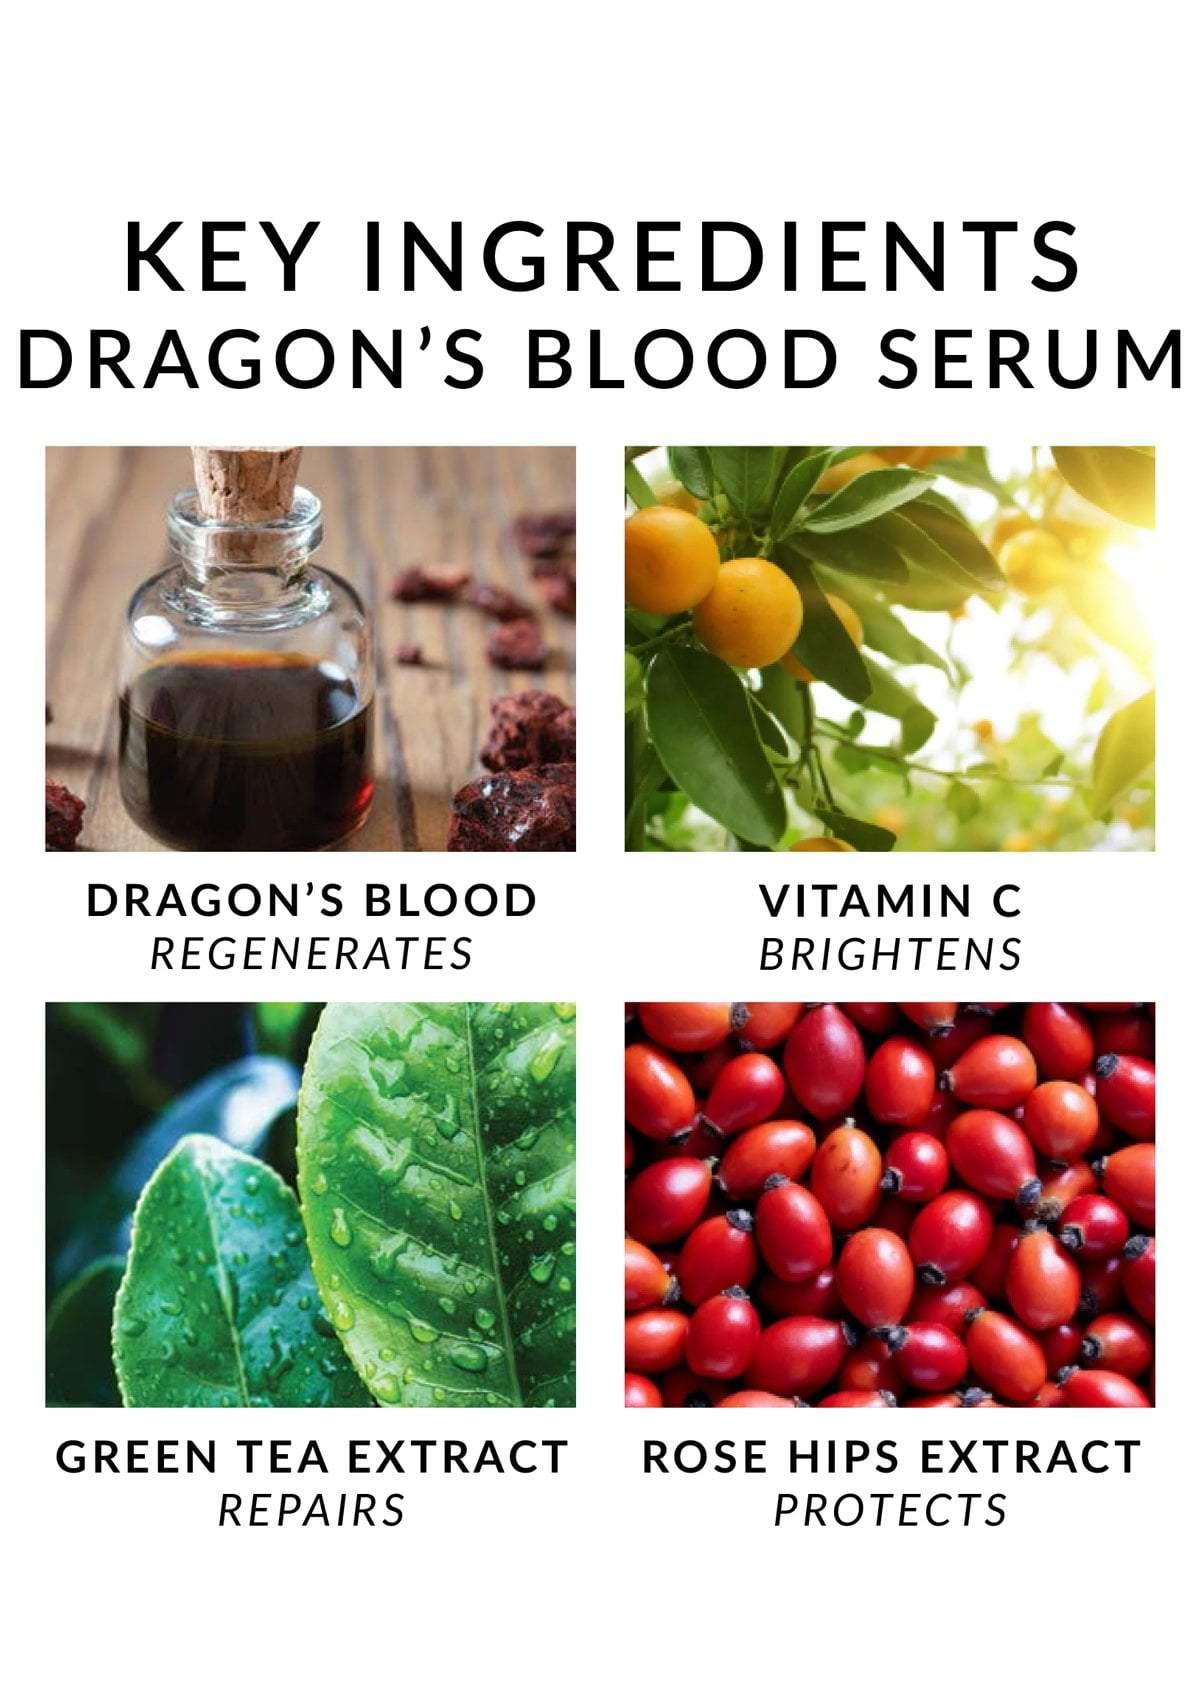 Wild Berry Dragons Blood Scented Oil 1/2 oz.